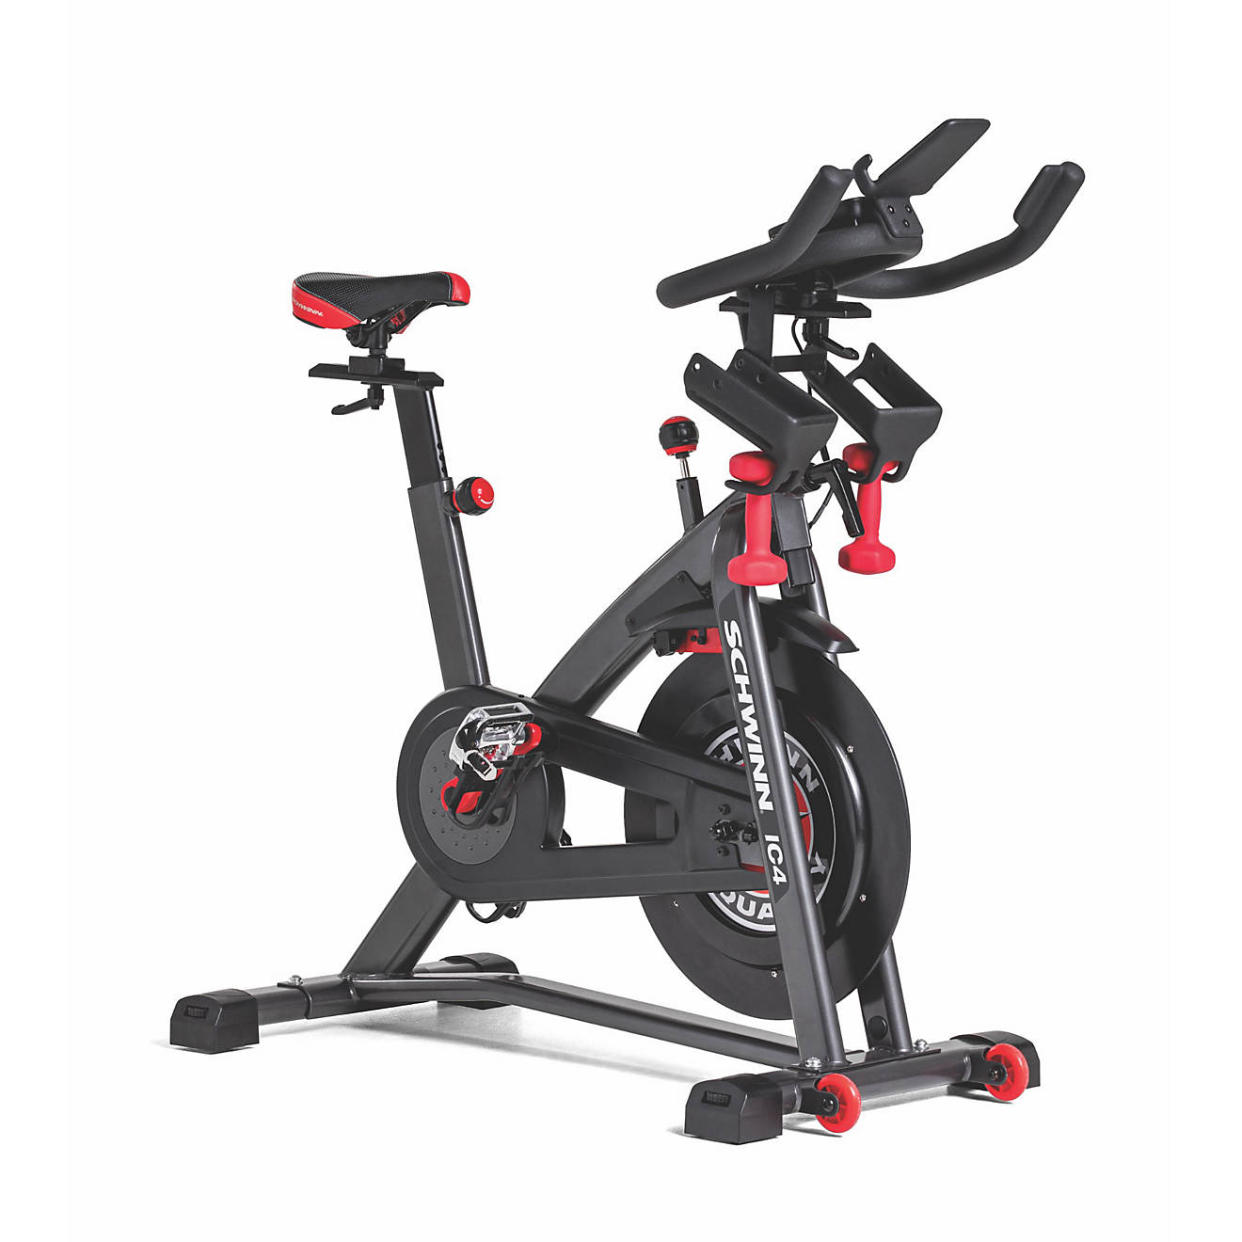 A great alternative if you don't have the means to splurge on an advanced exercise bike. (Photo: Academy Sports + Outdoors)